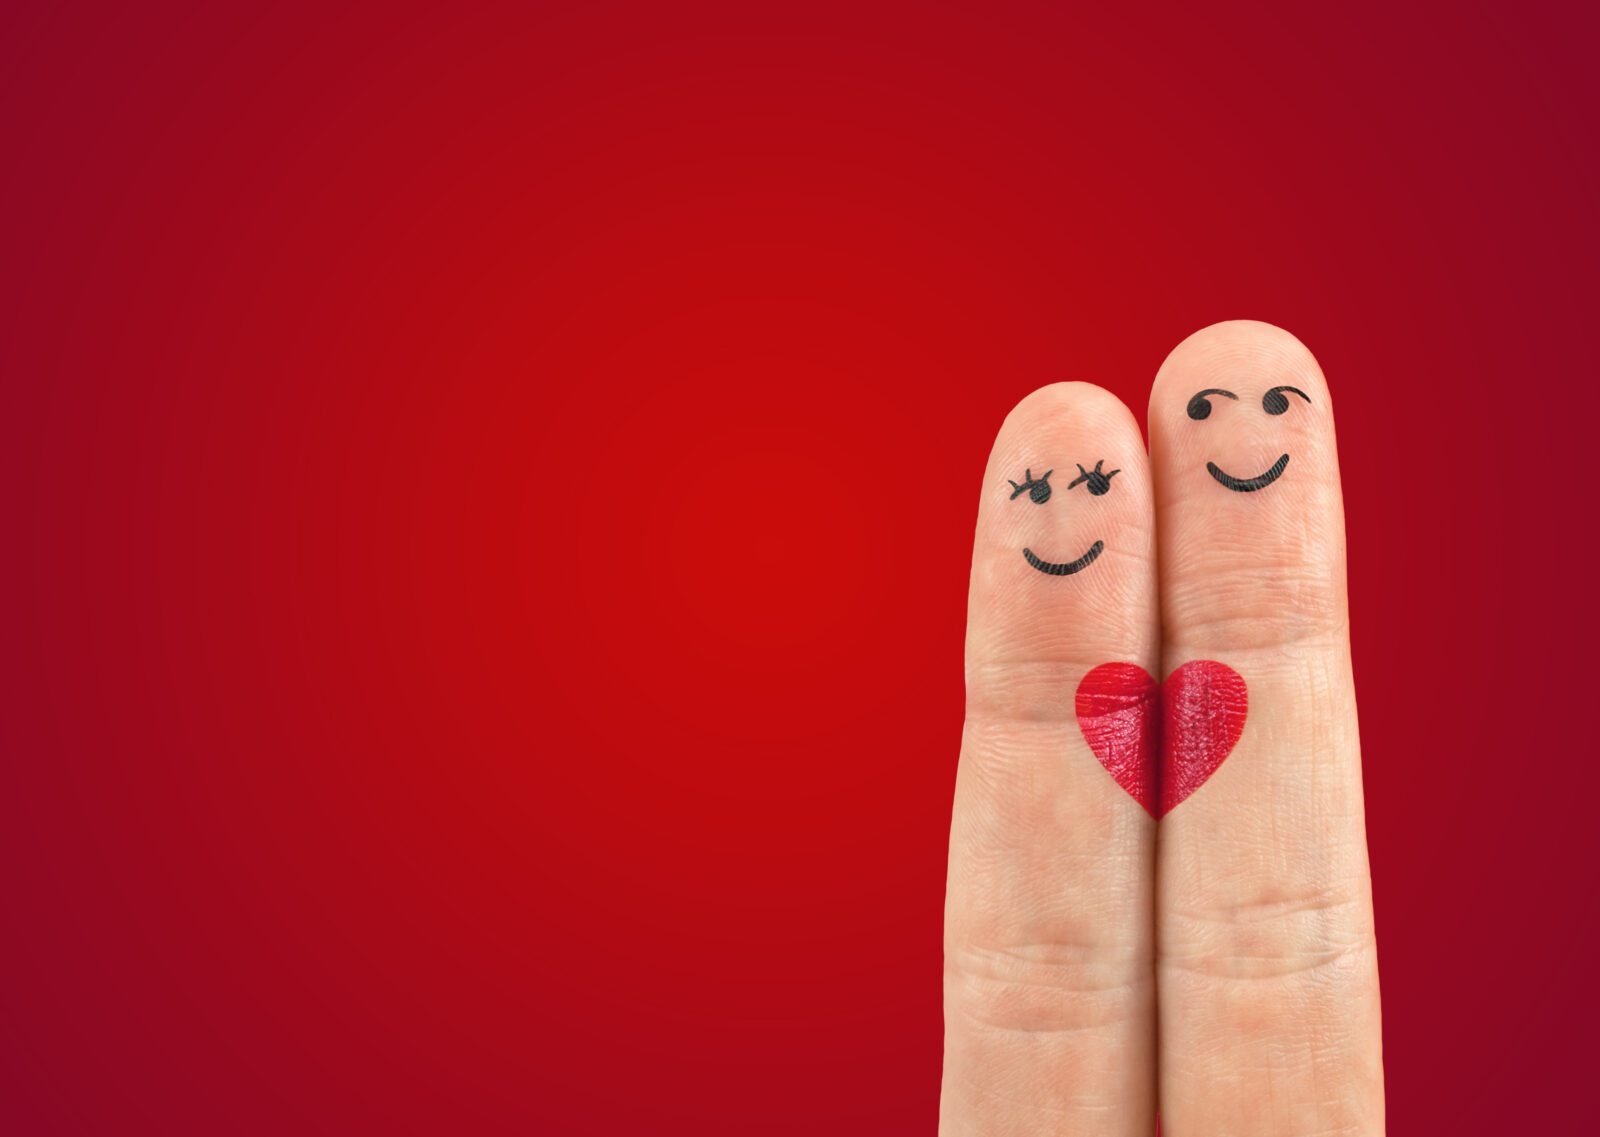 The sales + marketing love story you really want